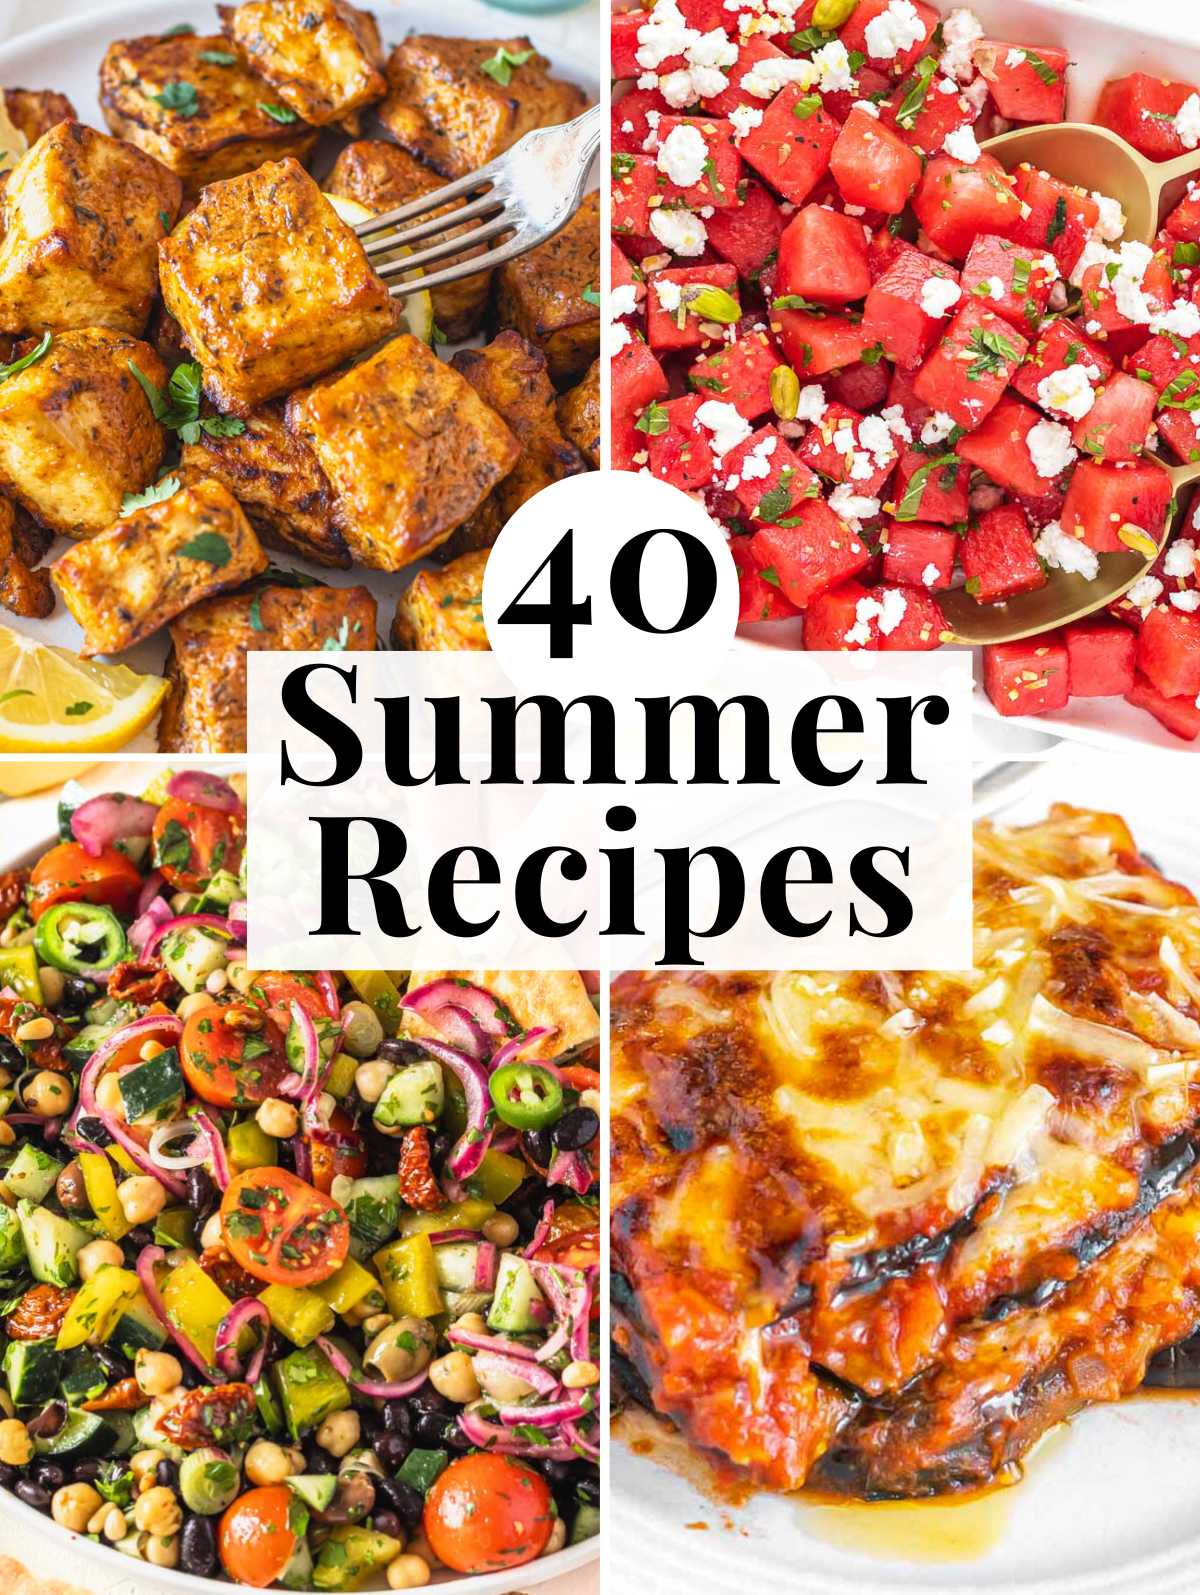 40 easy vegan summer recipes with breakfasts, lunches and dinners